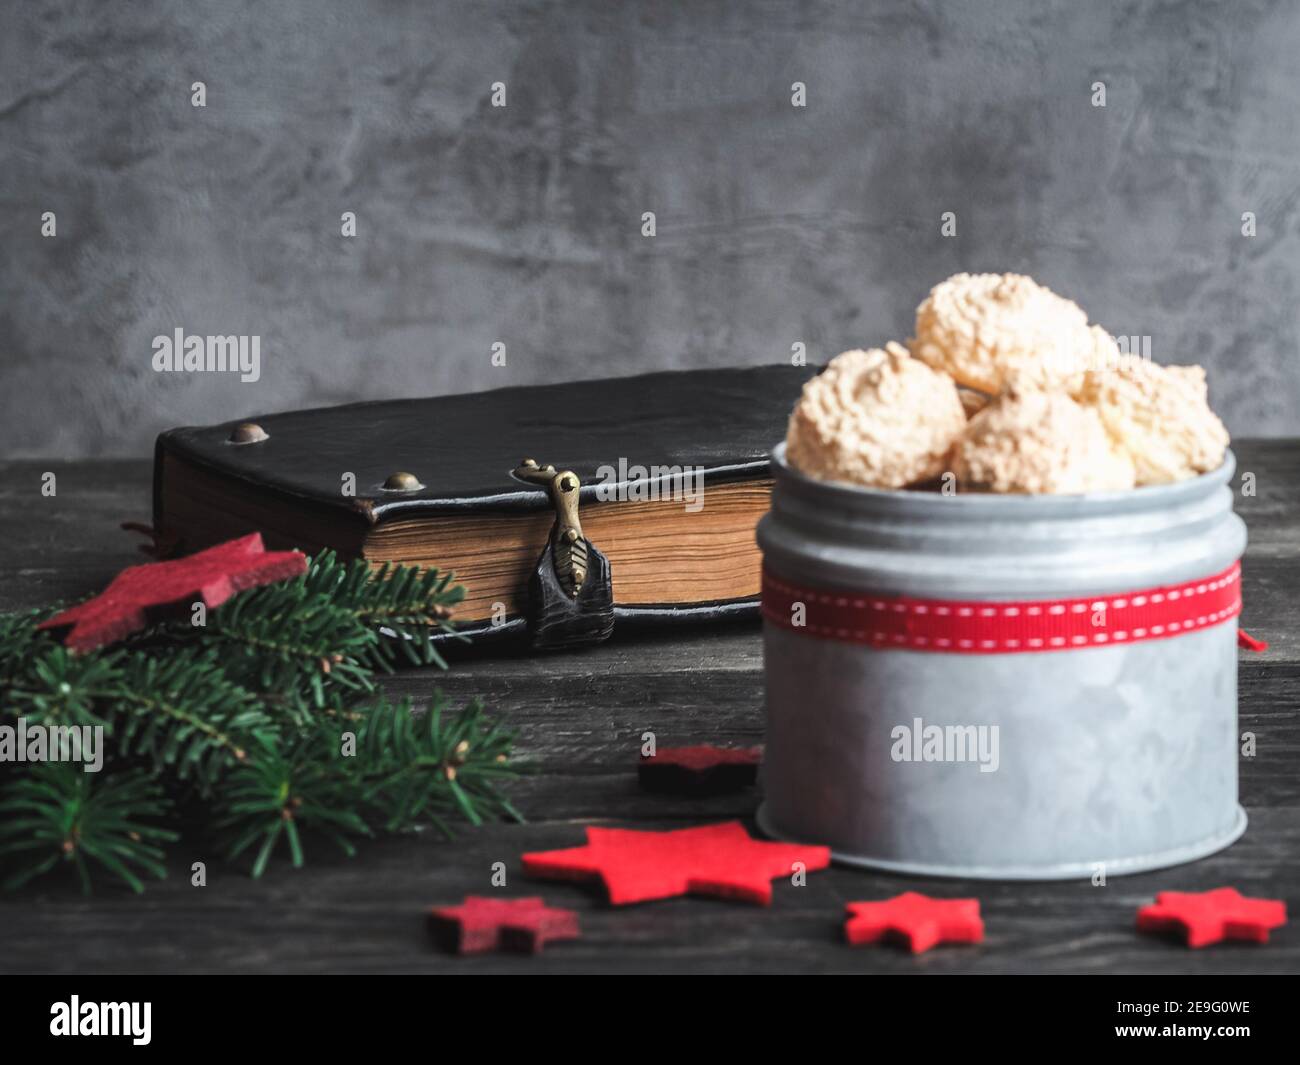 Christmas coconut meringue cookies in metal box and old bible on background. Dark and moody. Copy space. Horizontal shot. Stock Photo